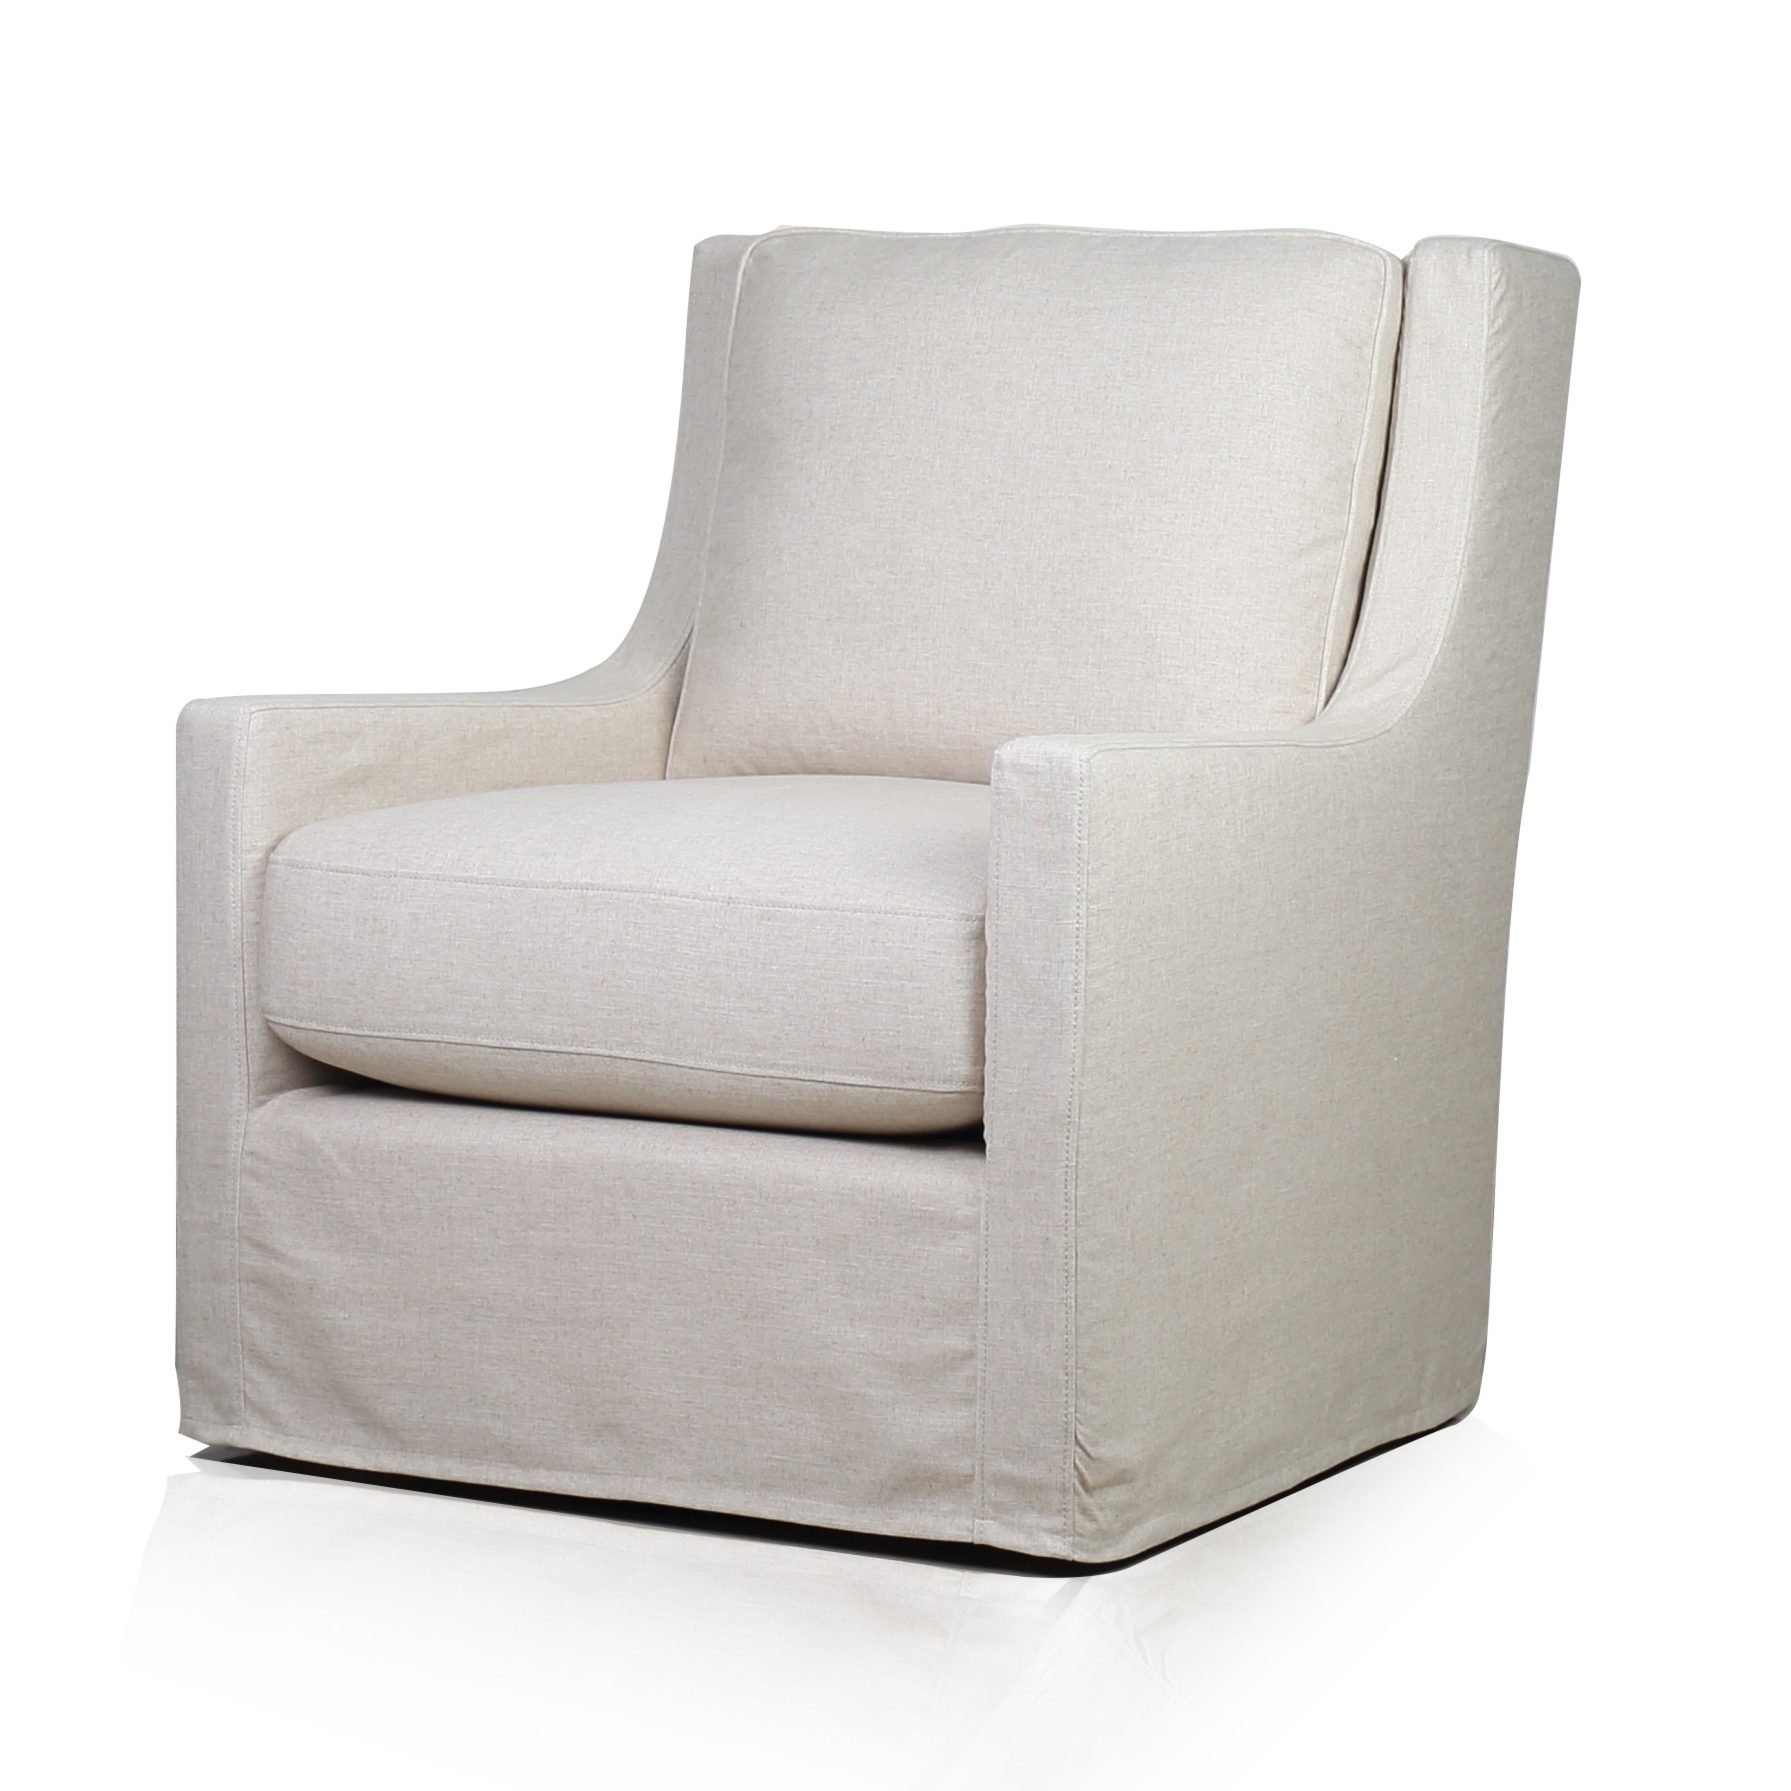 Myles Slipcovered Swivel Glider Chair in Windfield Natural - Spectra ...